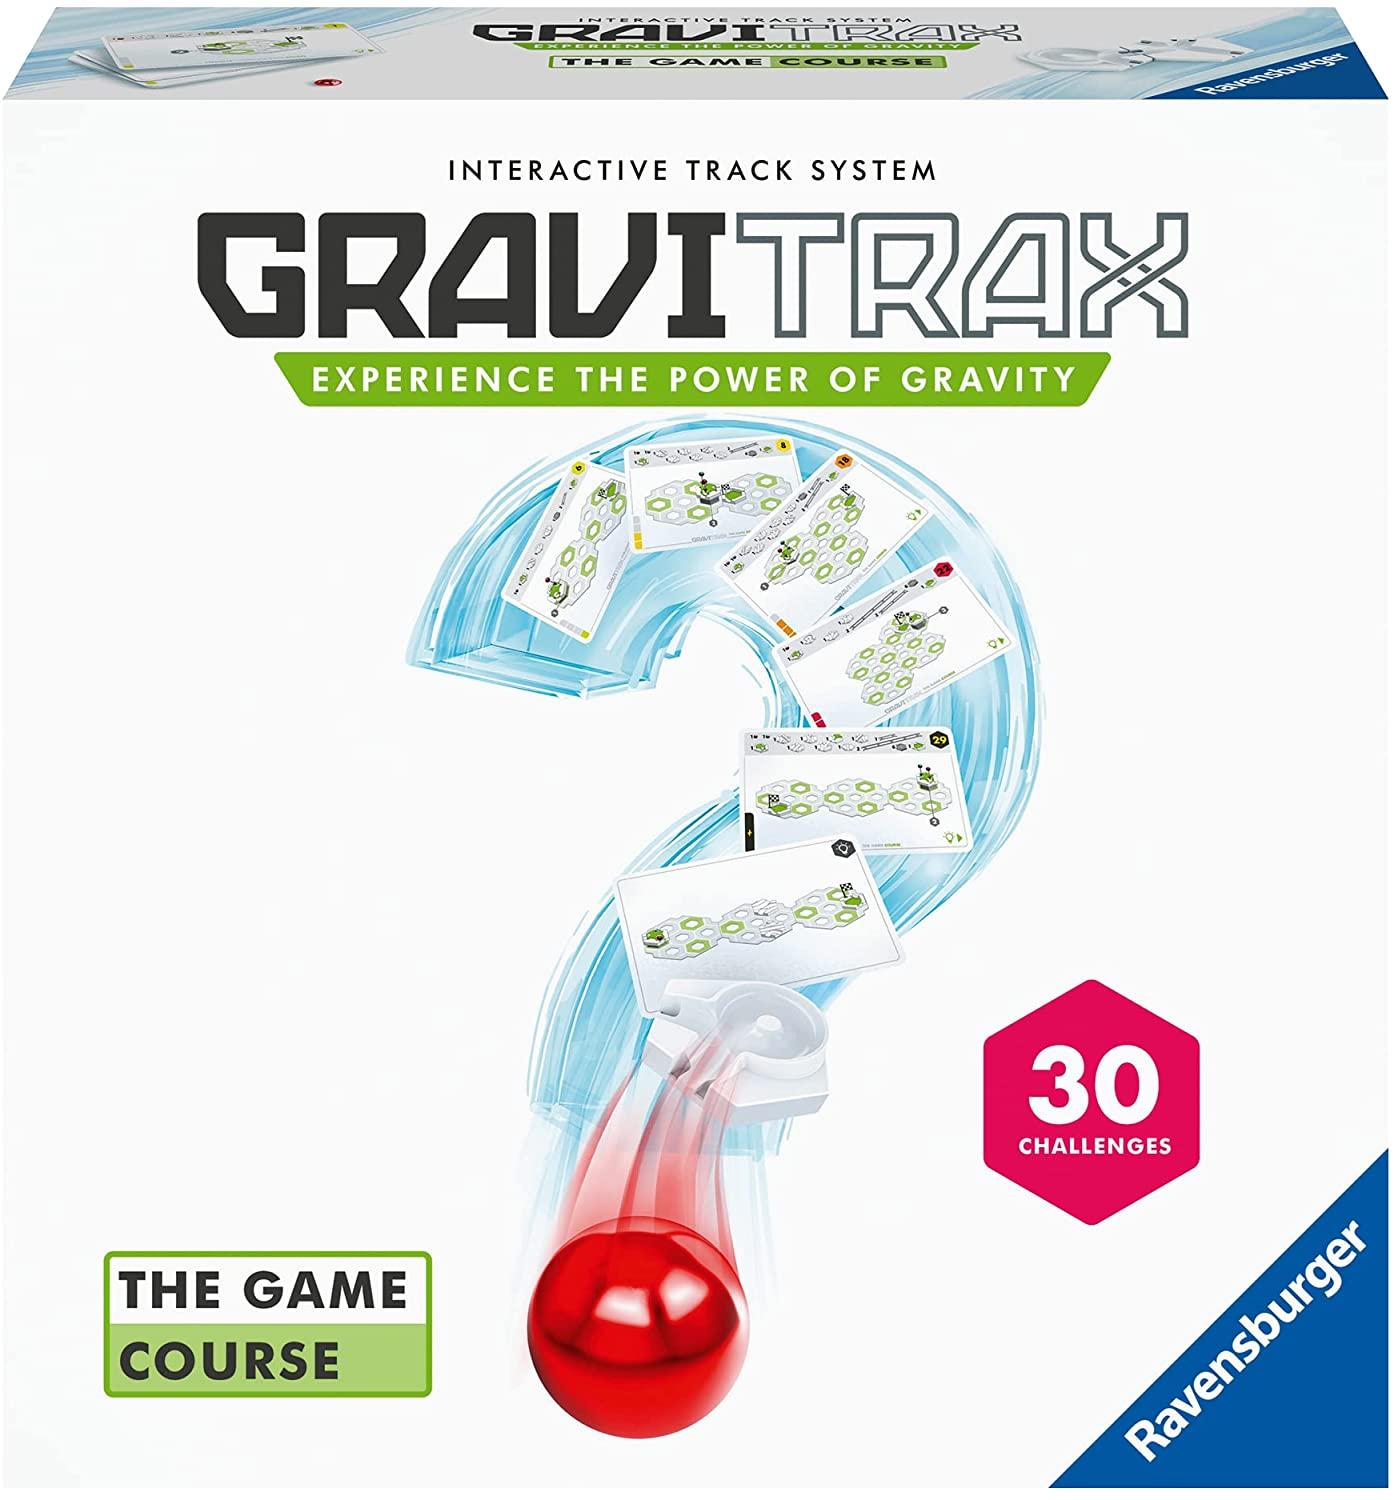 Gravitrax - The Game: Course